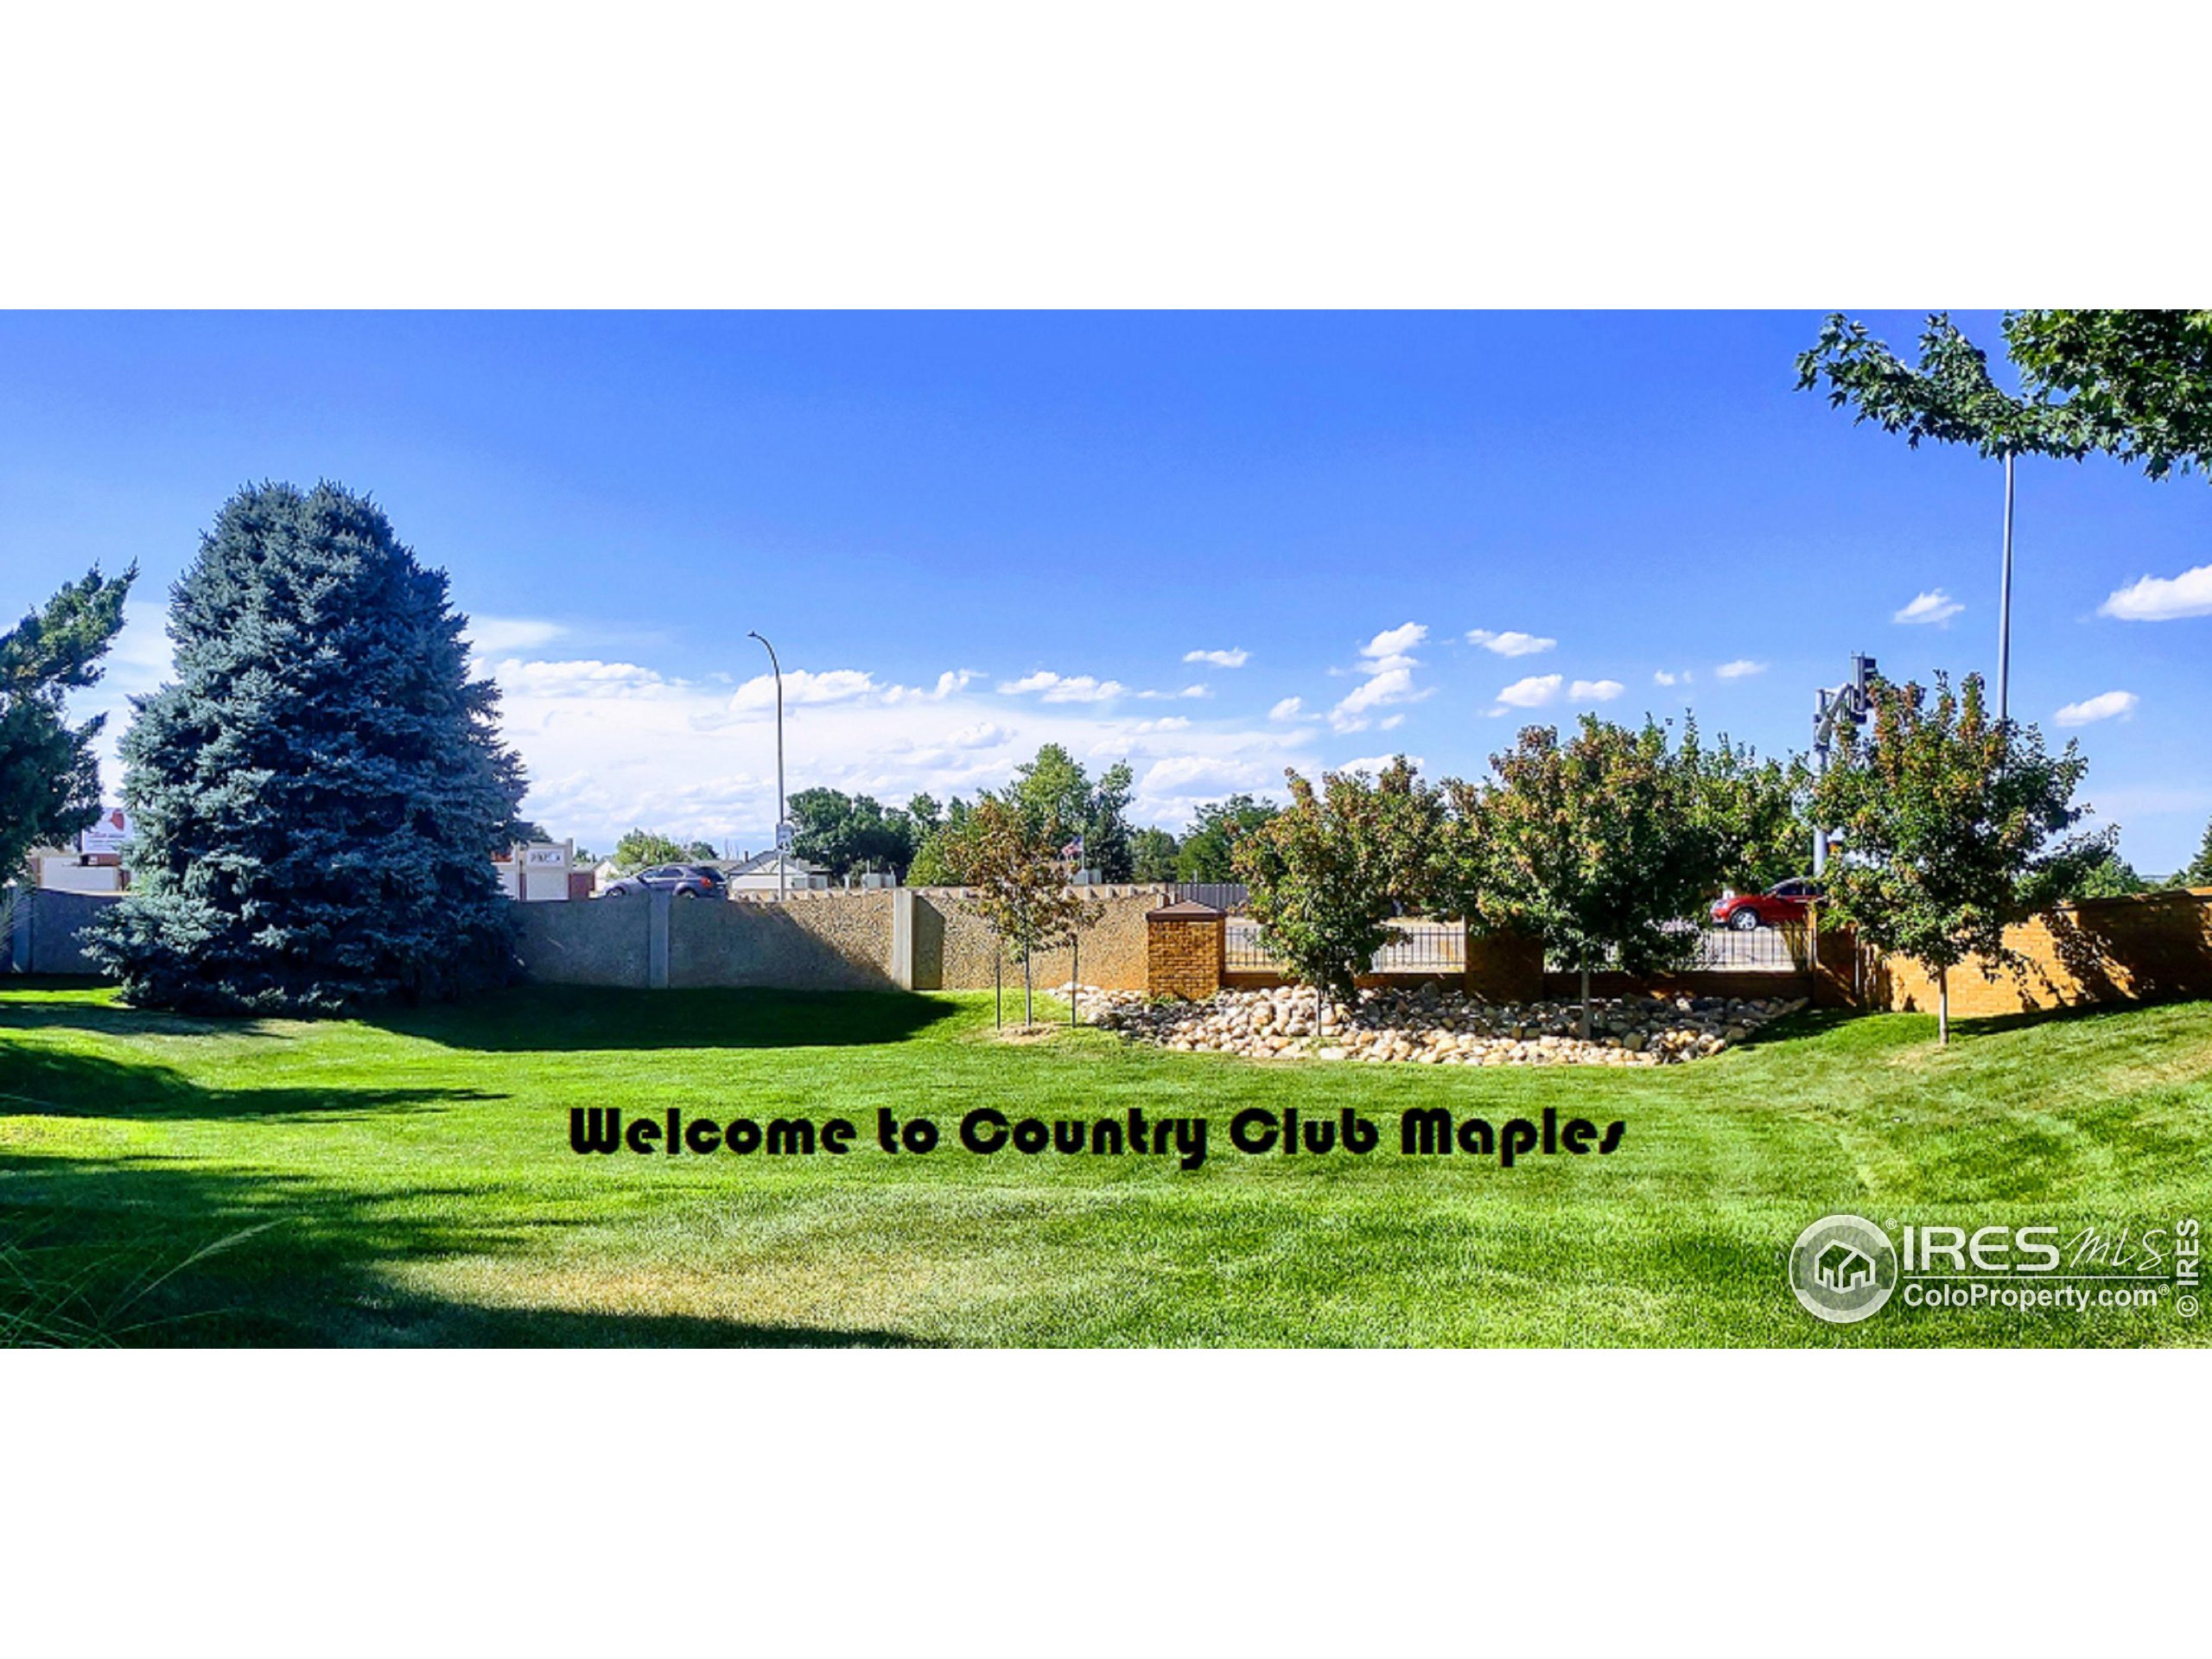 Greeley Country Club golf course grounds